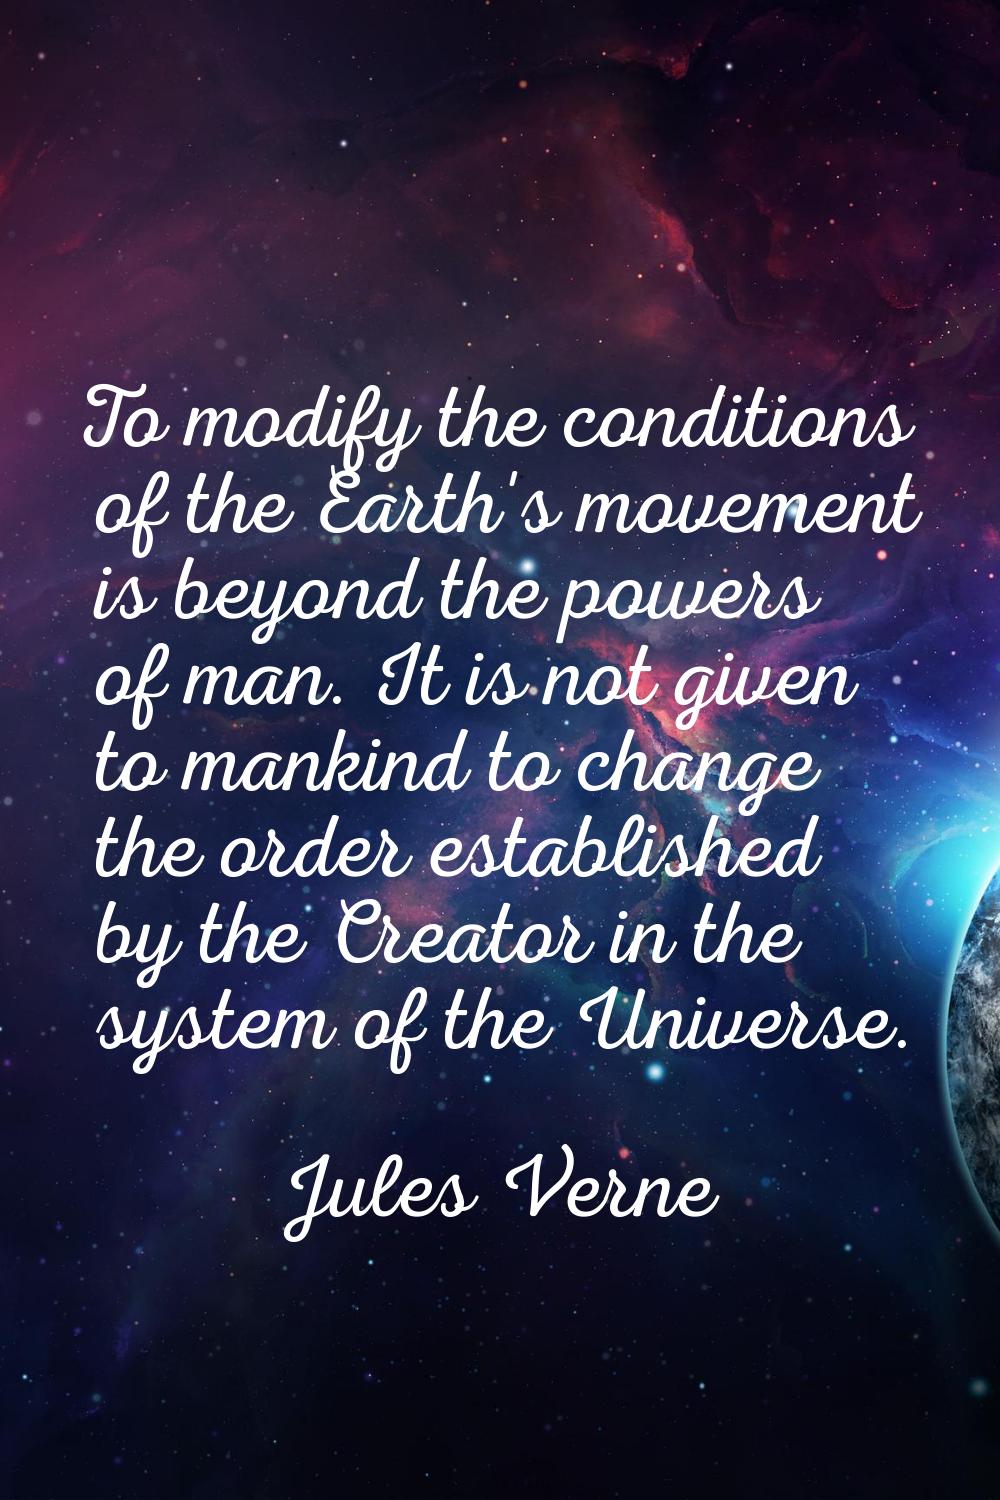 To modify the conditions of the Earth's movement is beyond the powers of man. It is not given to ma